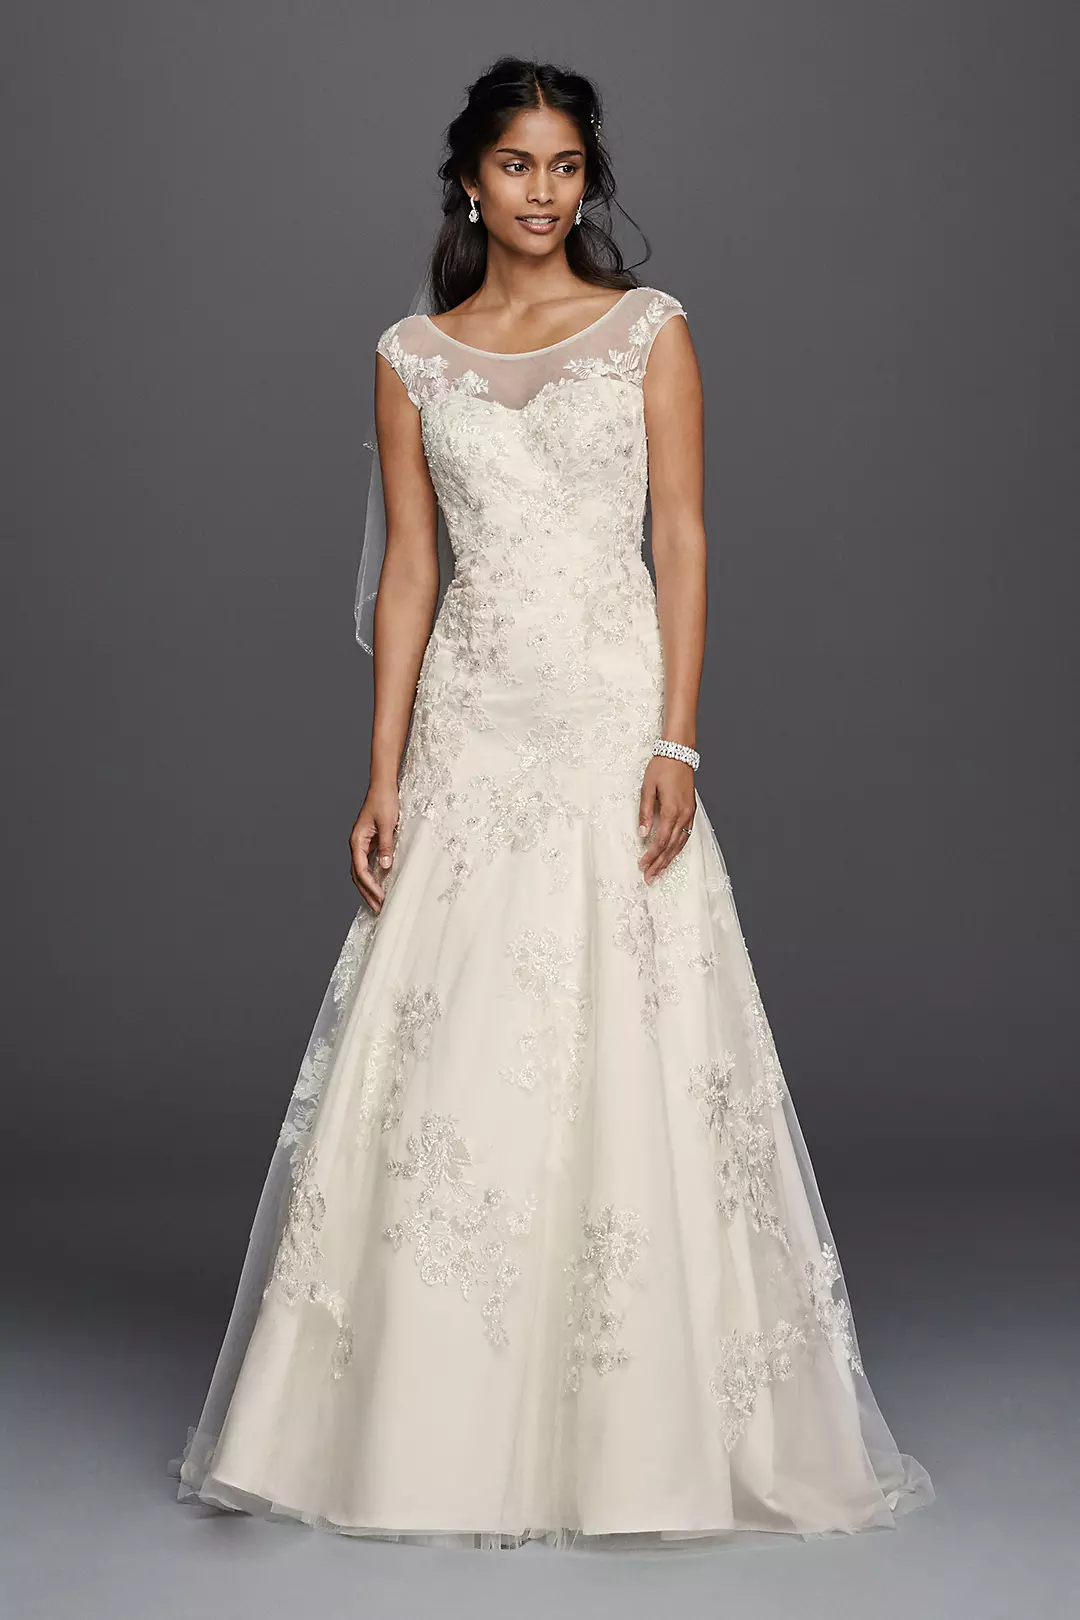 Jewel Tulle Aline Wedding Dress with Lace Applique Image